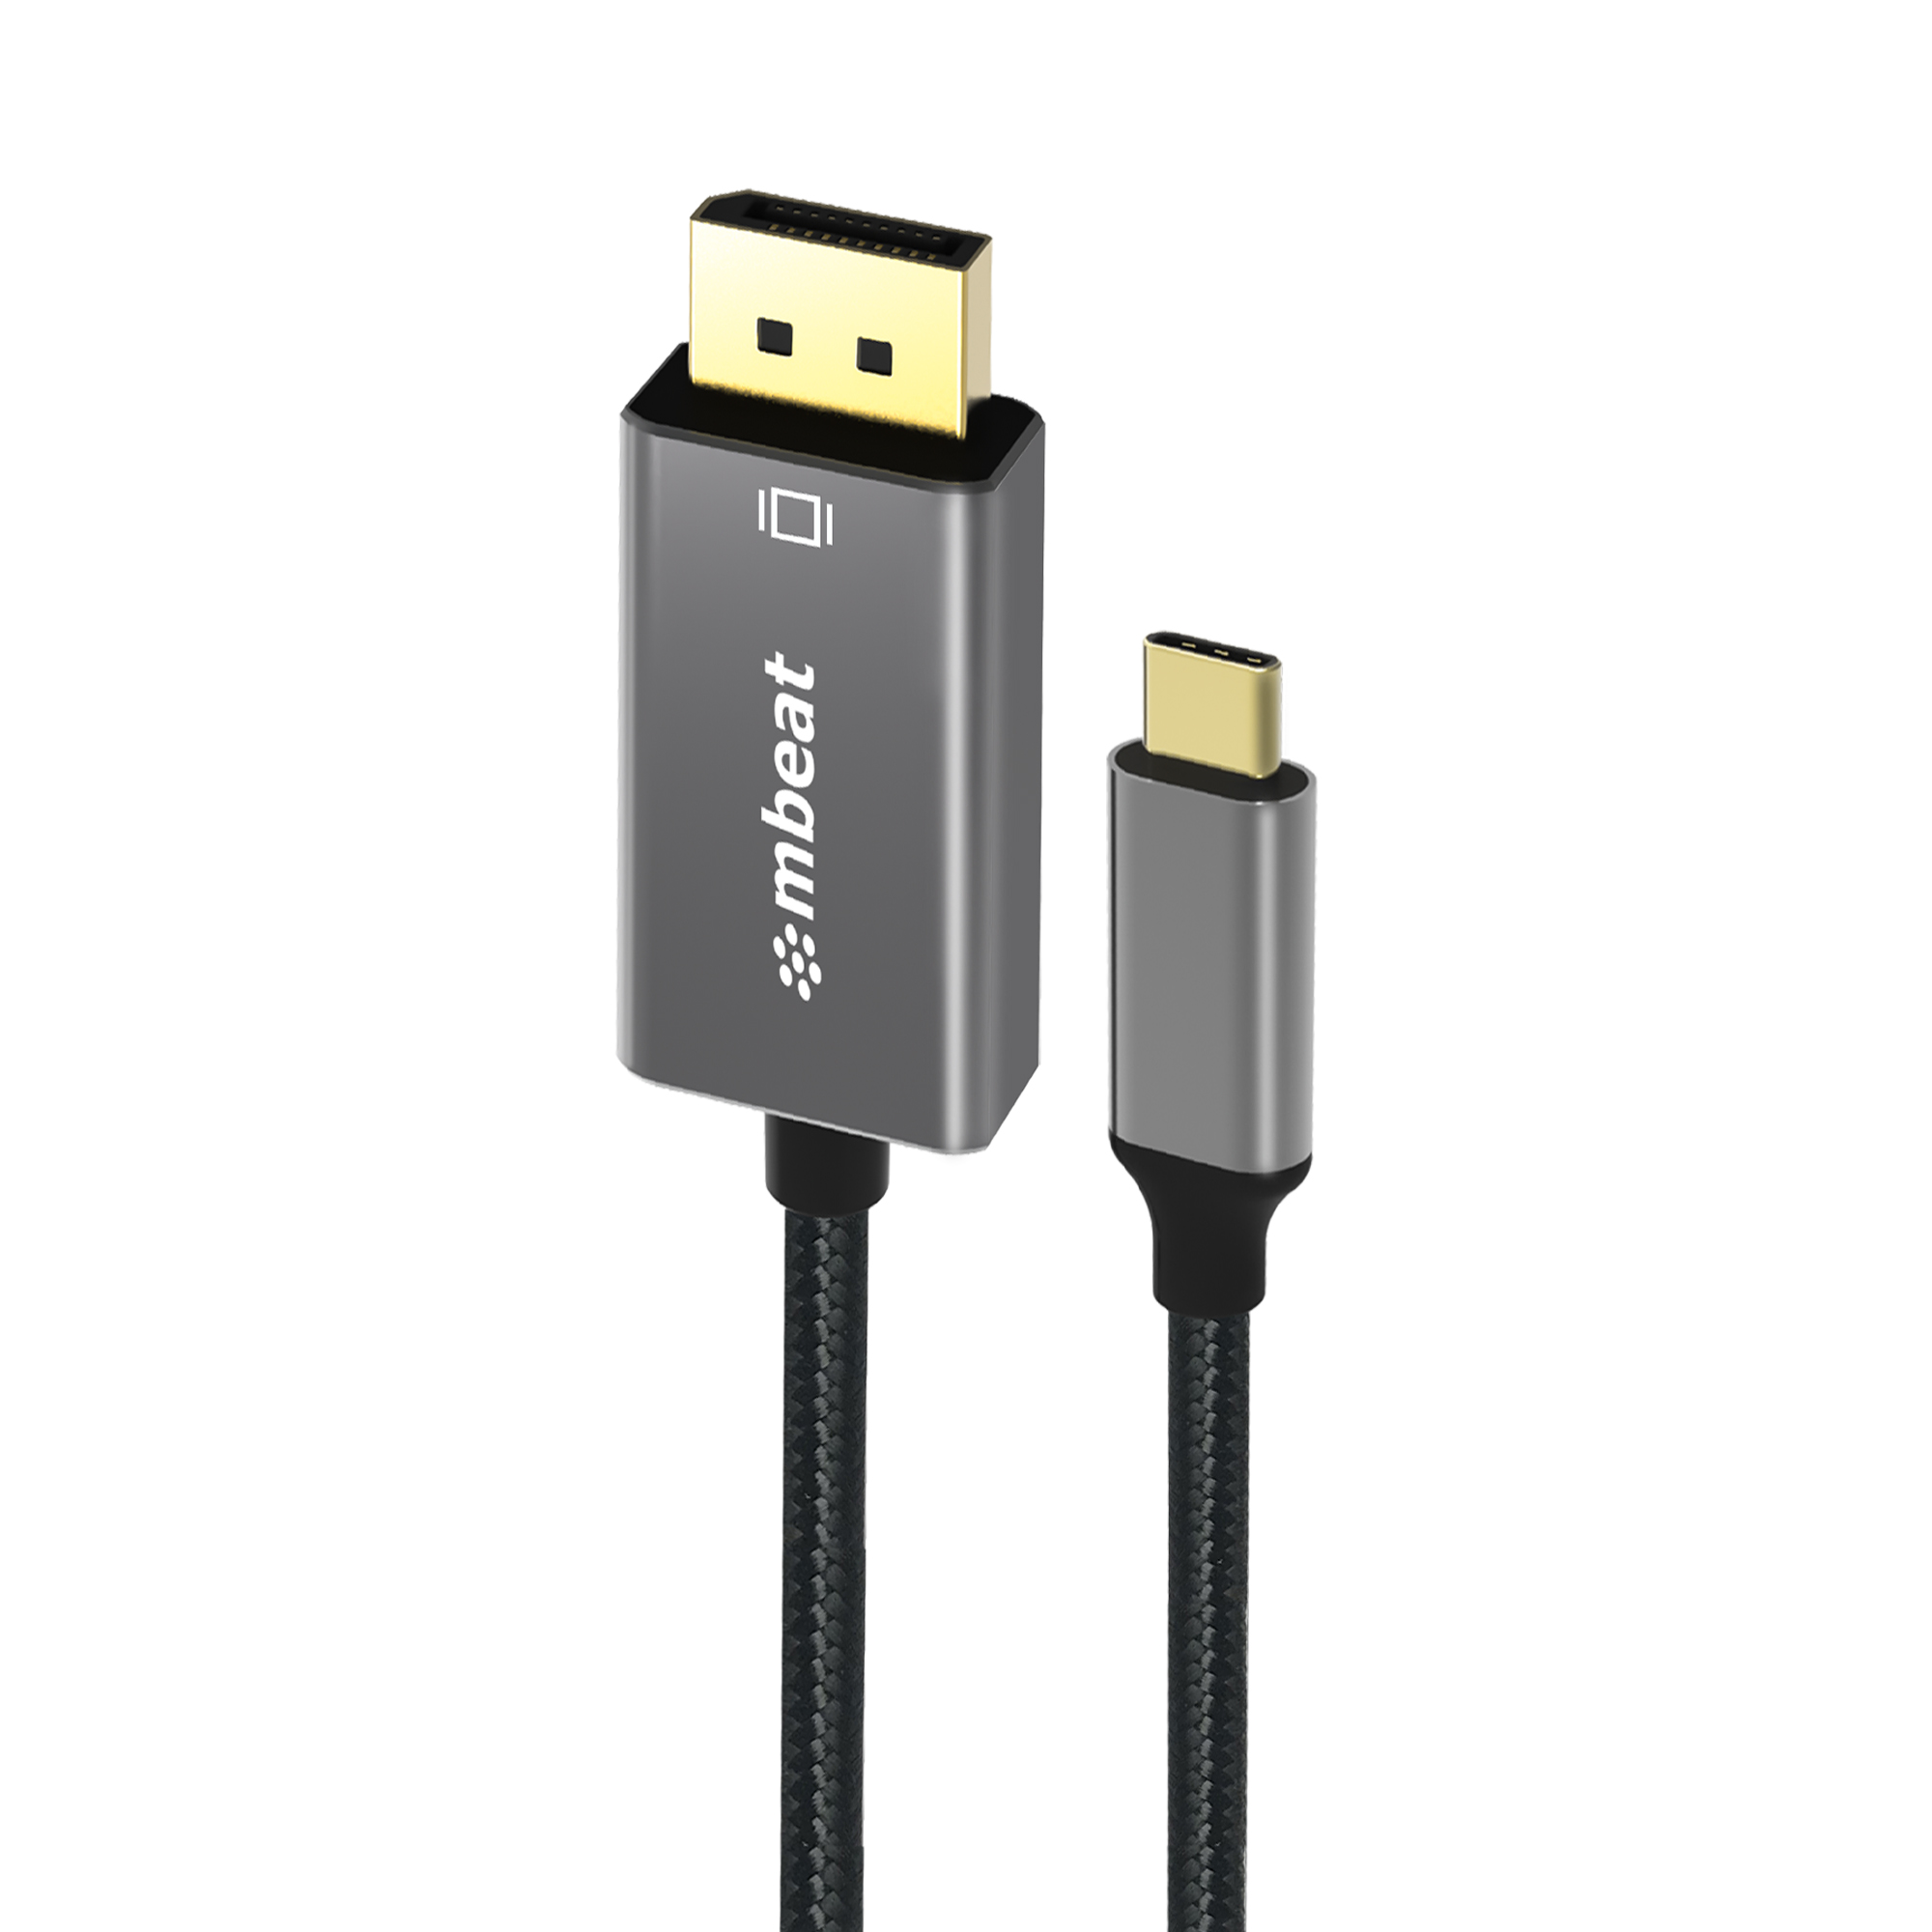 Adapters/MBEAT: mbeat, Tough, Link, 1.8m, 4K, USB-C, to, Display, Port, Cable, -, Converts, USB-C, to, DisplayPort, 4K@60Hz, (3840Ã—2160), Gold, Plated, 